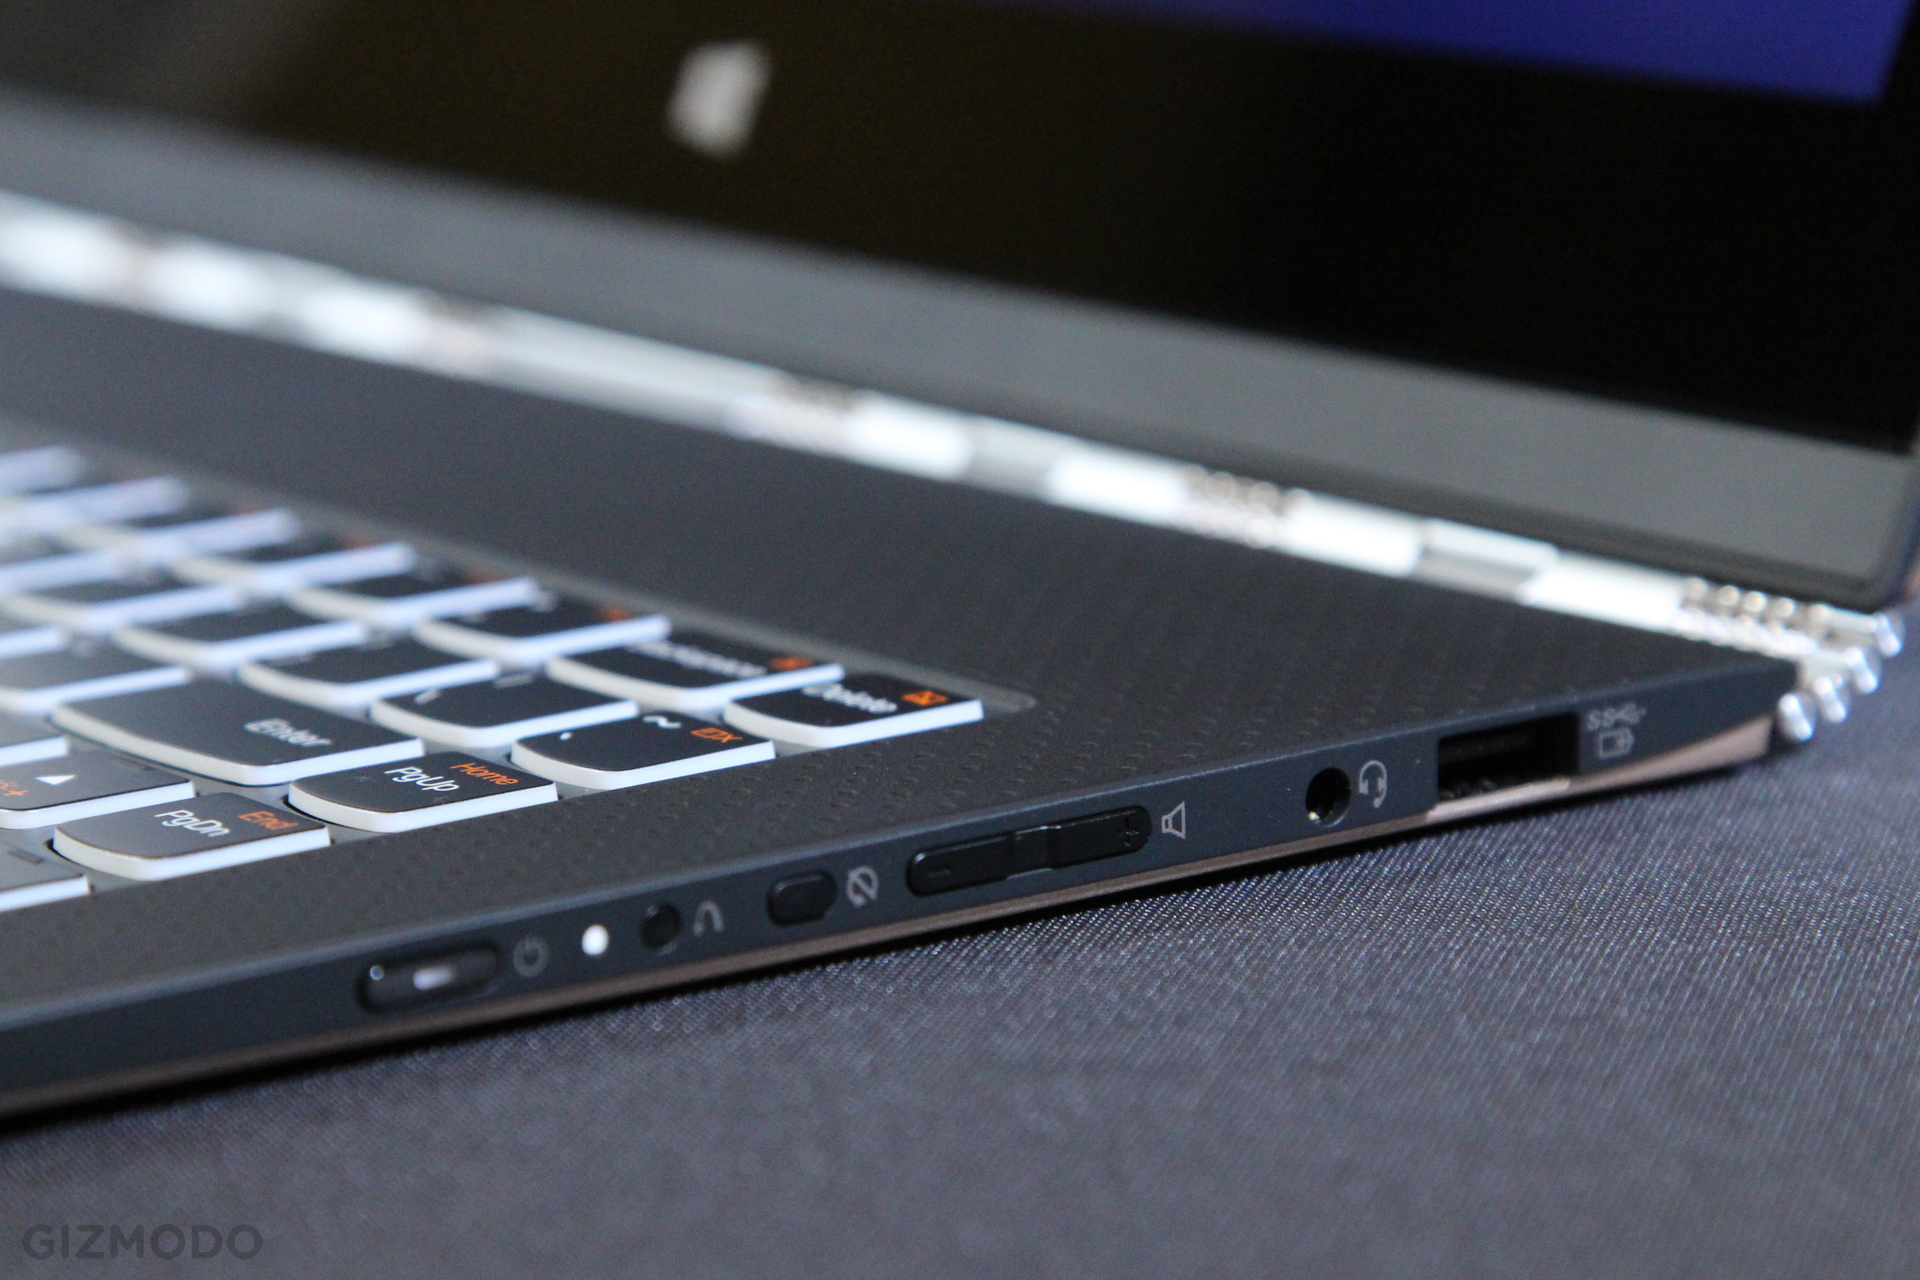 Lenovo's Yoga 3 Pro gets lighter and thinner, adds watchband hinge